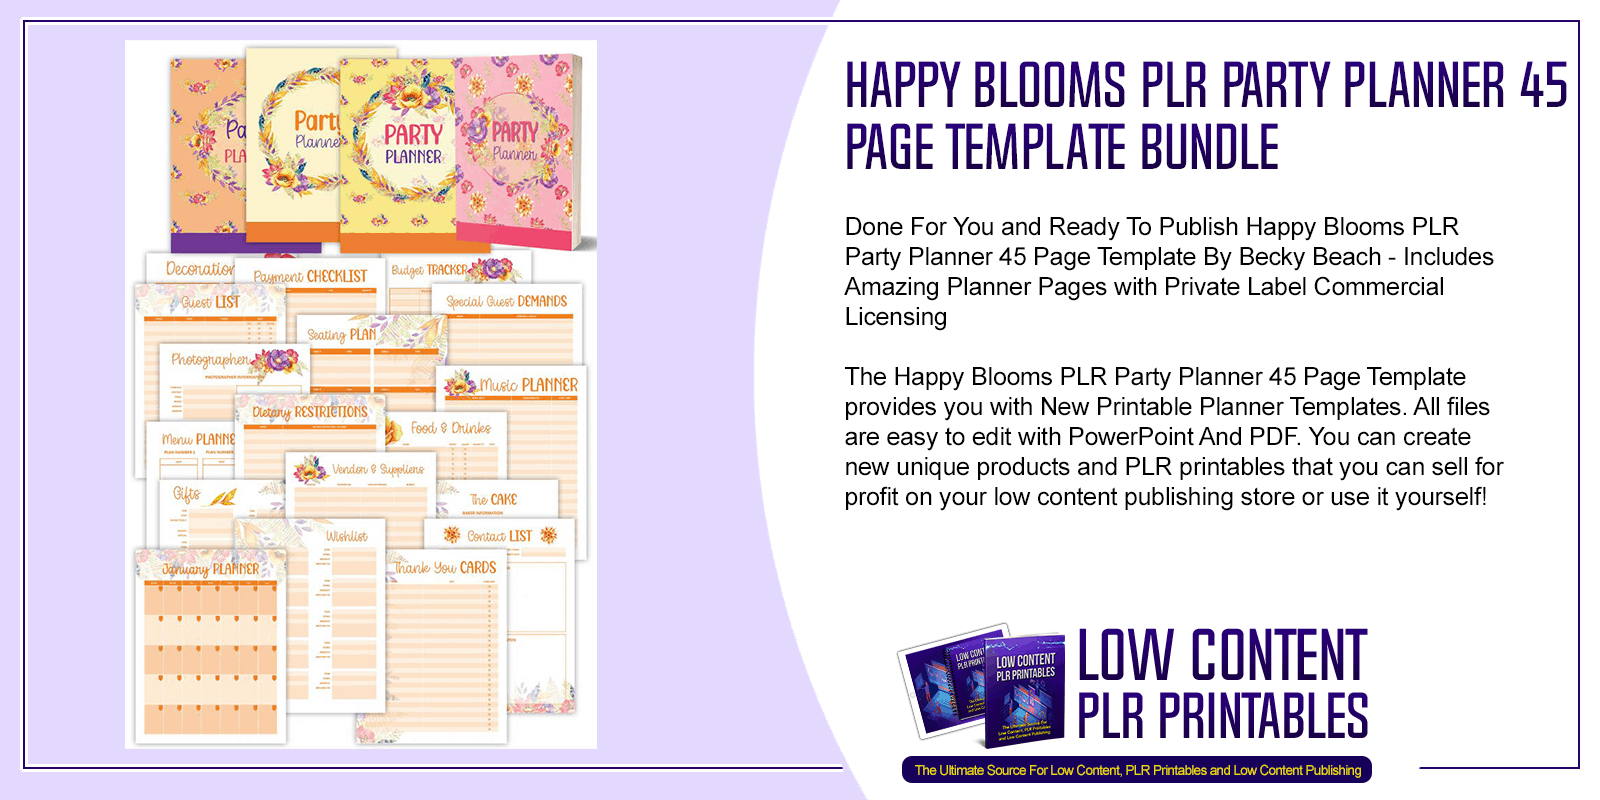 Happy Blooms PLR Party Planner 45 Page Template